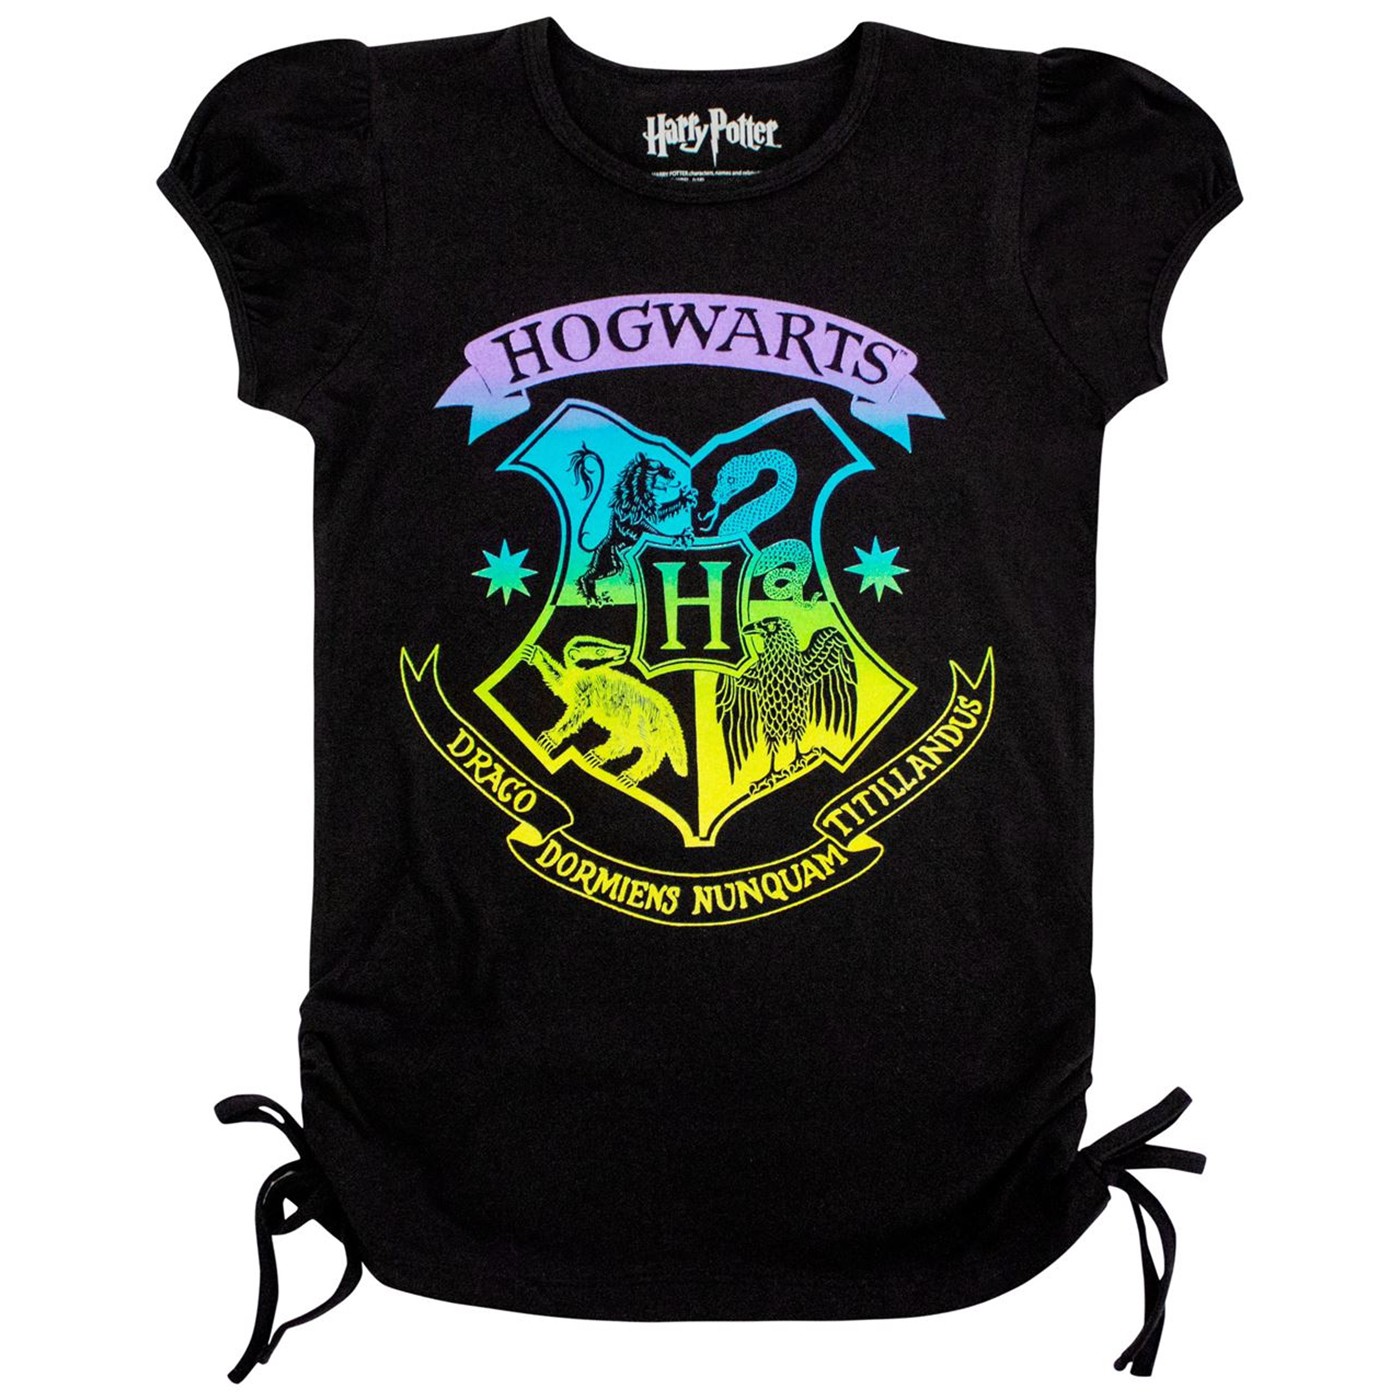 11 Best Harry Potter T-Shirts to Buy in 2020 | Guides To Buy